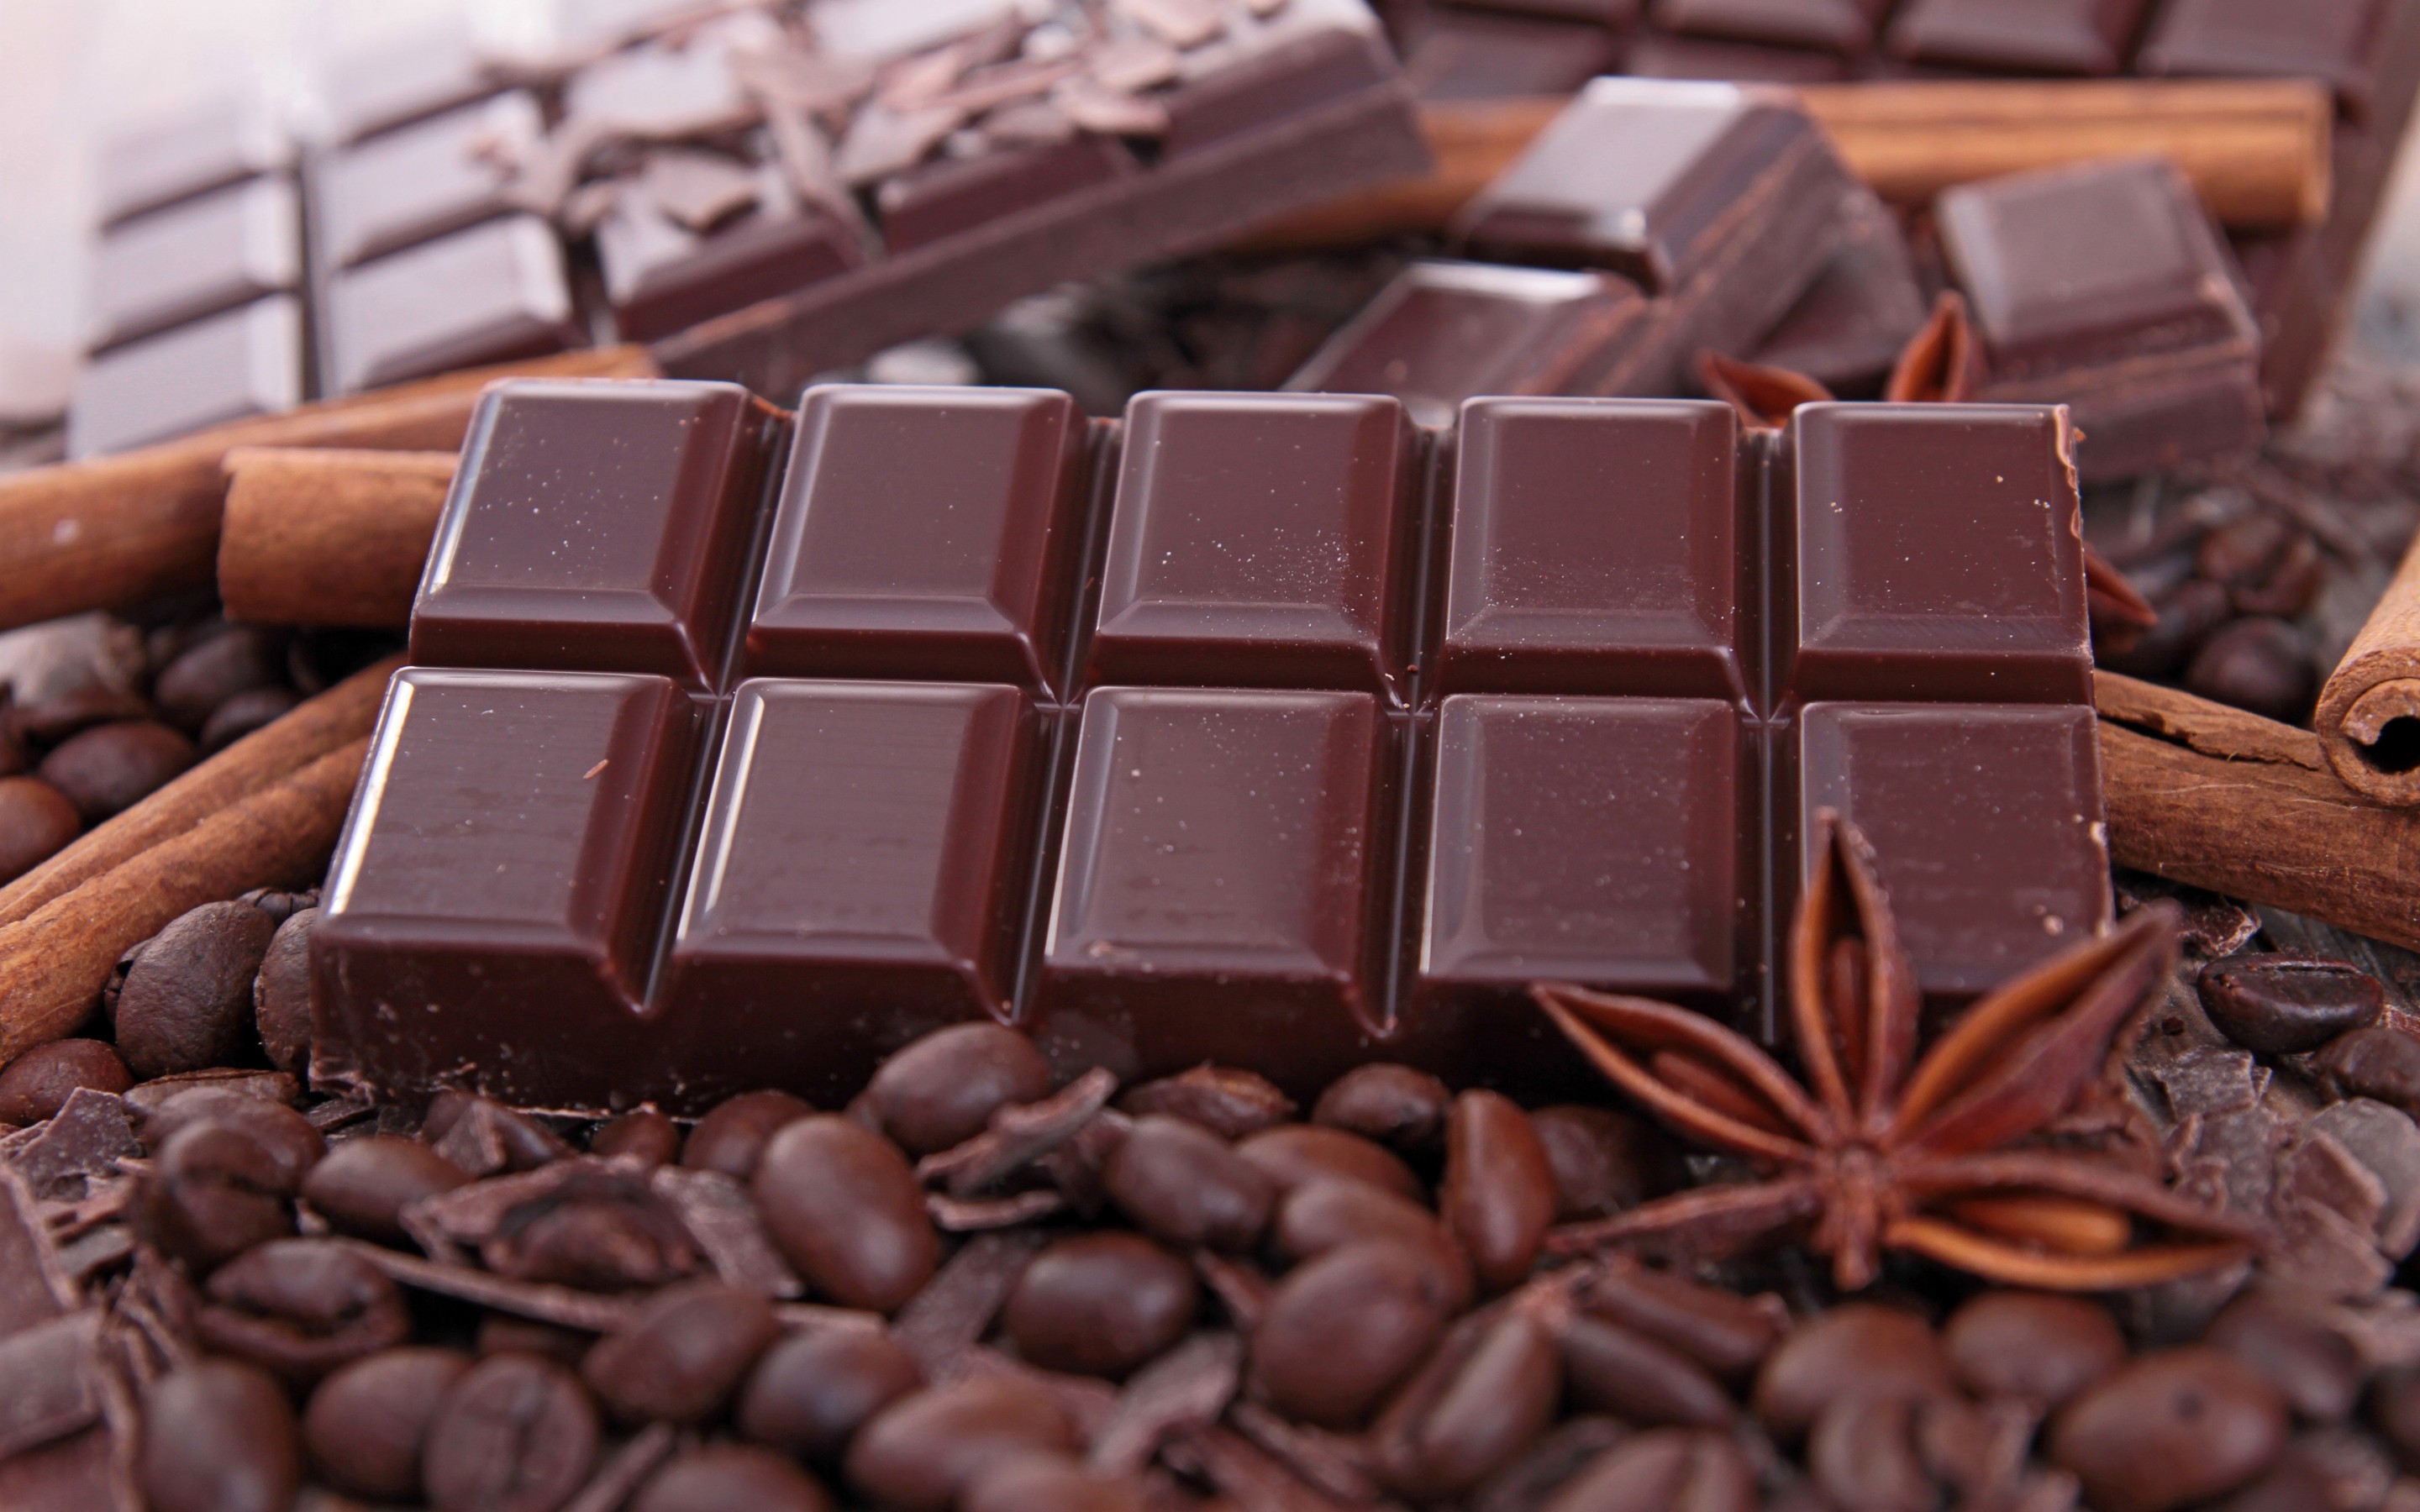 Chocolate HD Wallpaper Background Image